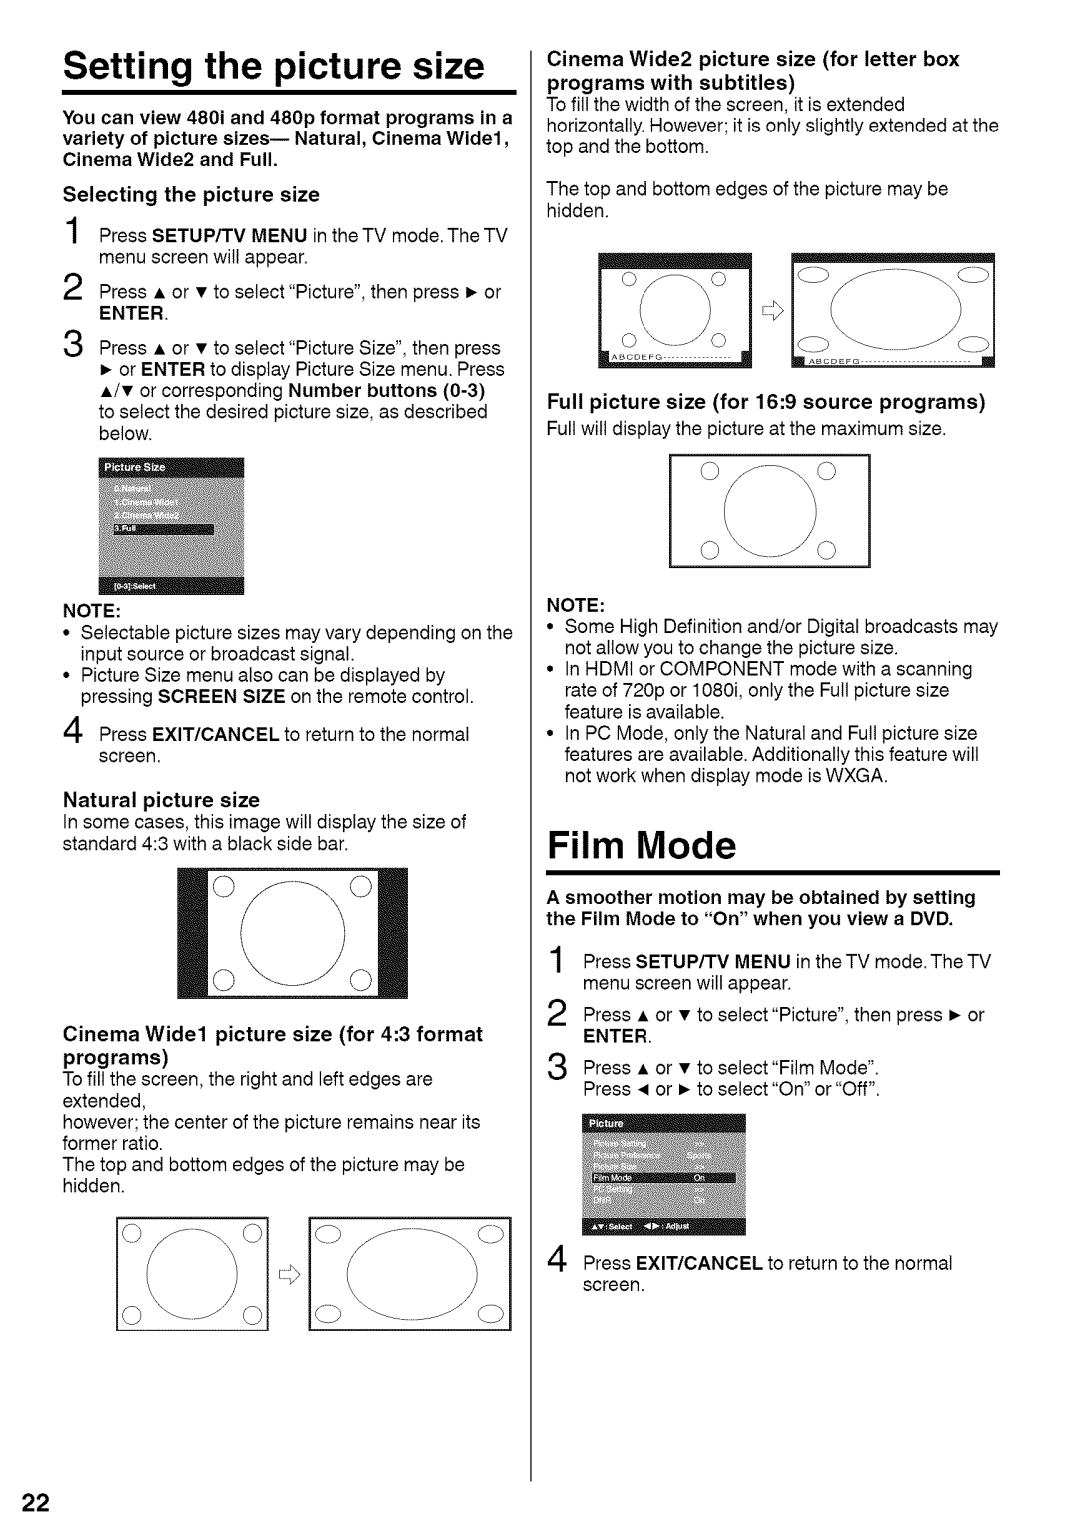 Sansui HDLCDVD220 owner manual Setting the picture size, Film Mode, Cinema Wide1 picture size for 43 format programs 